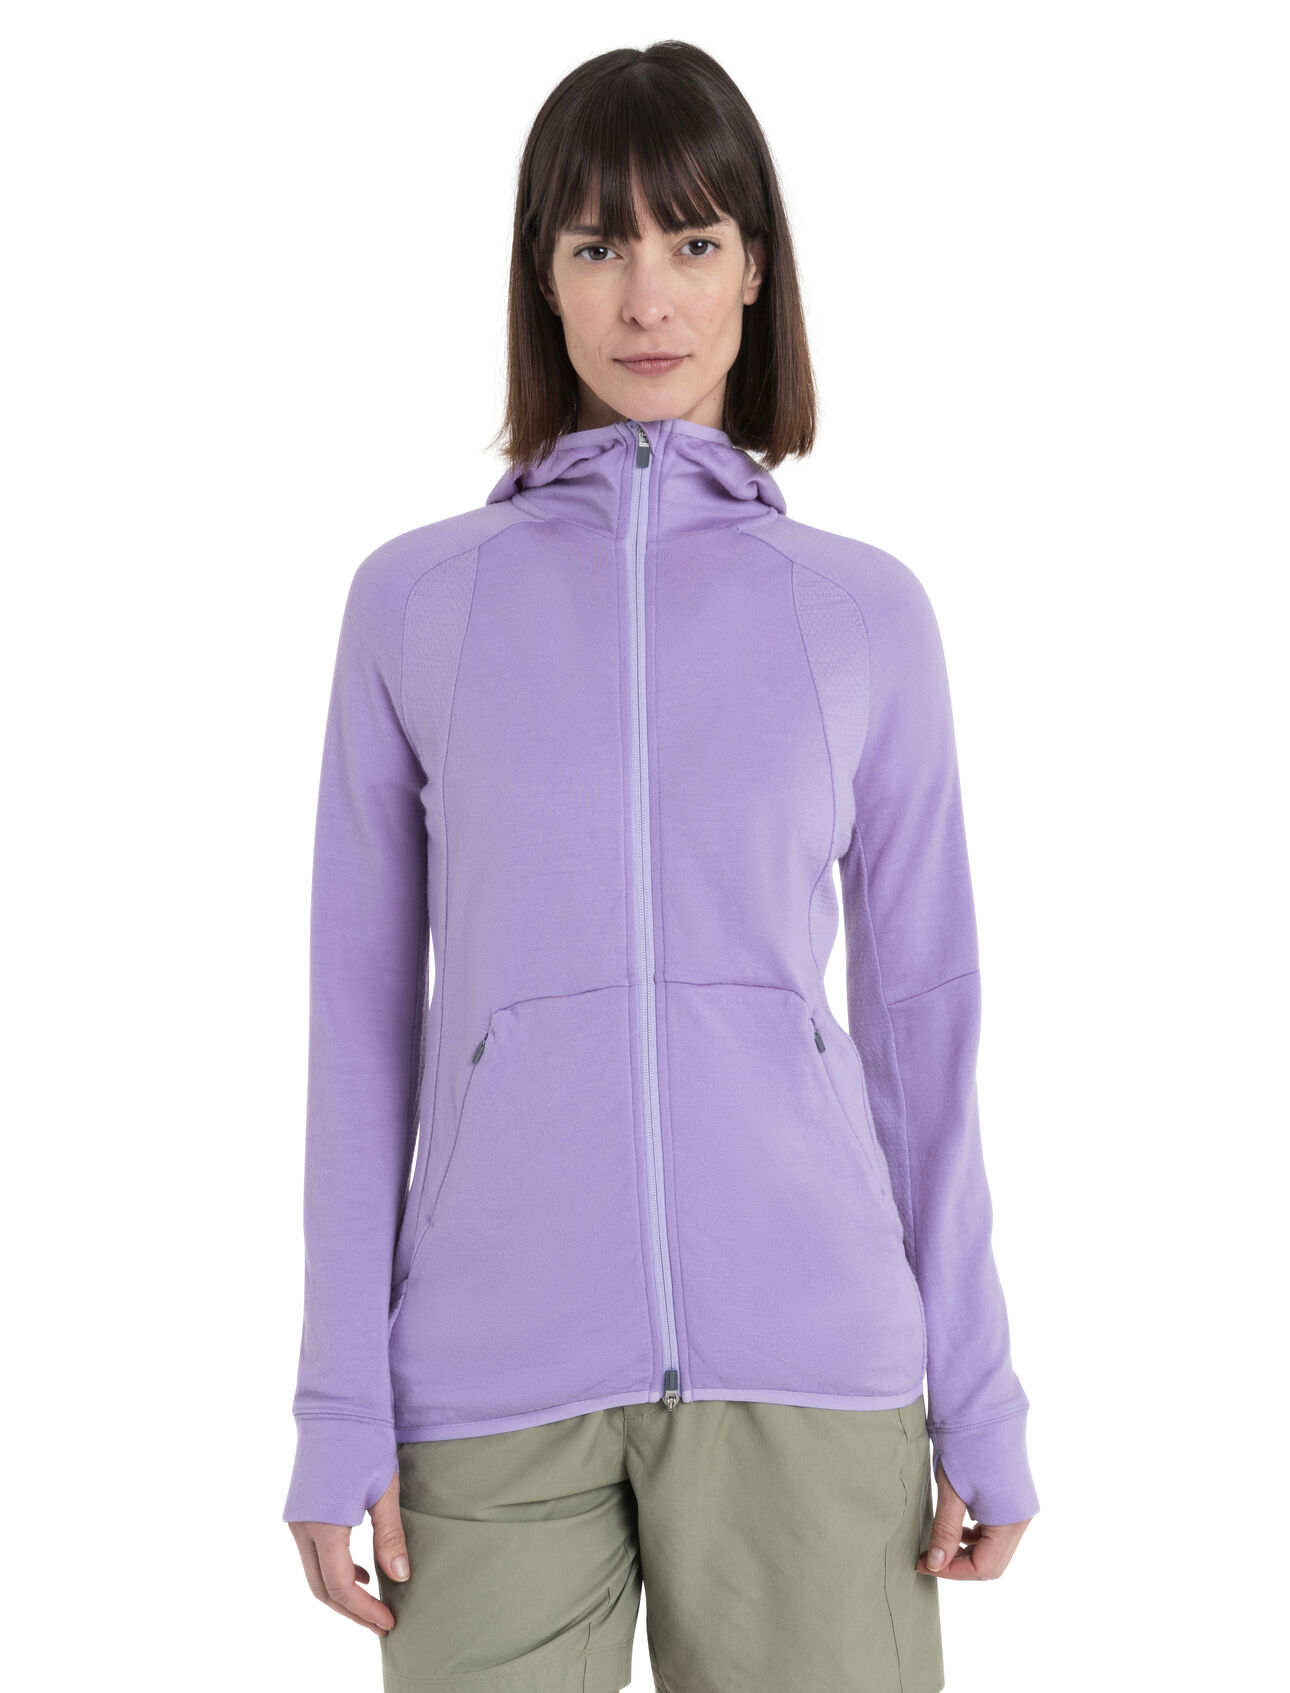 Womens ZoneKnit™ Merino Long Sleeve Zip Hoodie A midweight hoodie designed to balance warmth and breathability while on the move, the ZoneKnit™ Long Sleeve Zip Hood combines our 100% Merino fabric with strategic panels of eyelet mesh for enhanced airflow.